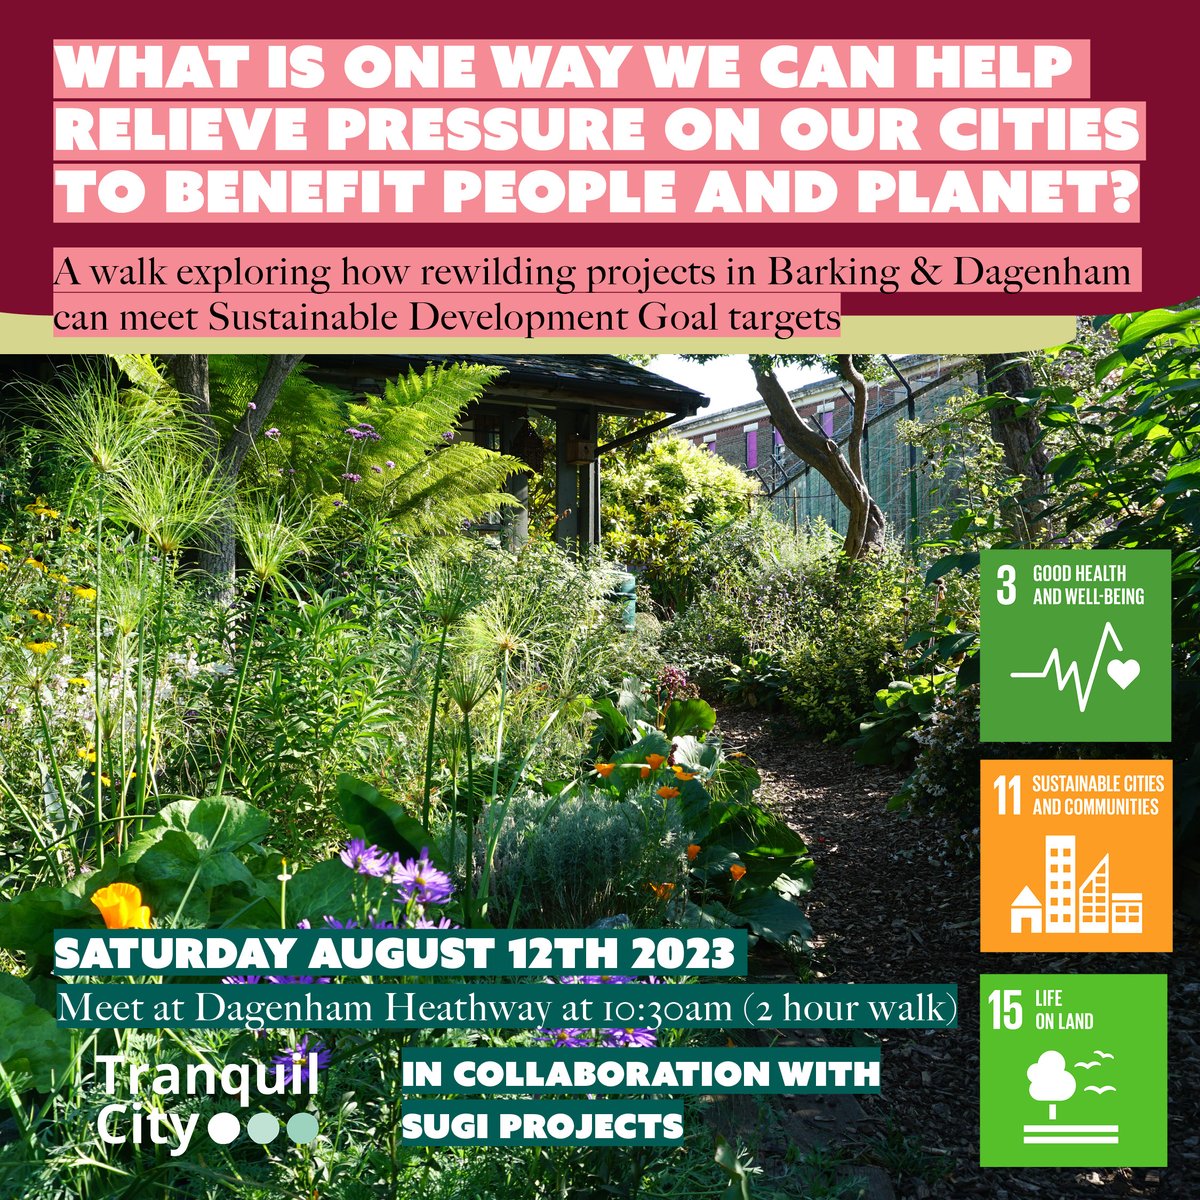 What is one way #urbanplanners and #landscapearchitects can address city challenges? Rewilding! Join us on Saturday 12th August for a #SummerWalk exploring how #rewilding initiatives can improve #SDG progress in #BarkingandDagenham buff.ly/3DhWZnM